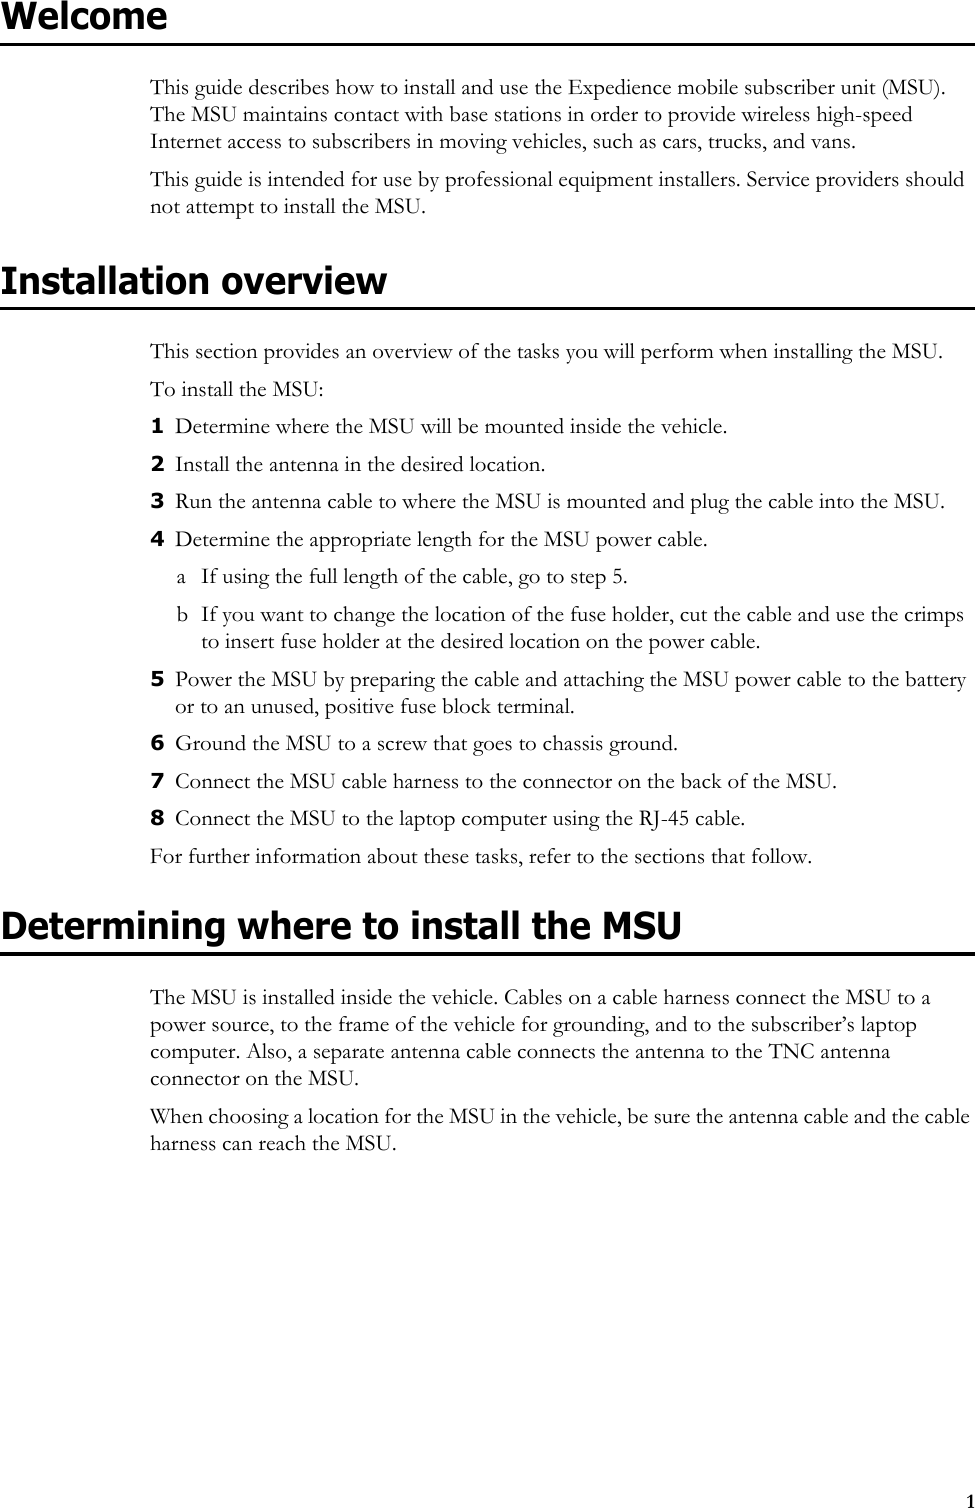 1WelcomeThis guide describes how to install and use the Expedience mobile subscriber unit (MSU). The MSU maintains contact with base stations in order to provide wireless high-speed Internet access to subscribers in moving vehicles, such as cars, trucks, and vans.This guide is intended for use by professional equipment installers. Service providers should not attempt to install the MSU. Installation overviewThis section provides an overview of the tasks you will perform when installing the MSU. To install the MSU:1Determine where the MSU will be mounted inside the vehicle.2Install the antenna in the desired location. 3Run the antenna cable to where the MSU is mounted and plug the cable into the MSU.4Determine the appropriate length for the MSU power cable. a If using the full length of the cable, go to step 5. b If you want to change the location of the fuse holder, cut the cable and use the crimps to insert fuse holder at the desired location on the power cable.5Power the MSU by preparing the cable and attaching the MSU power cable to the battery or to an unused, positive fuse block terminal. 6Ground the MSU to a screw that goes to chassis ground.7Connect the MSU cable harness to the connector on the back of the MSU. 8Connect the MSU to the laptop computer using the RJ-45 cable. For further information about these tasks, refer to the sections that follow.Determining where to install the MSUThe MSU is installed inside the vehicle. Cables on a cable harness connect the MSU to a power source, to the frame of the vehicle for grounding, and to the subscriber’s laptop computer. Also, a separate antenna cable connects the antenna to the TNC antenna connector on the MSU. When choosing a location for the MSU in the vehicle, be sure the antenna cable and the cable harness can reach the MSU.